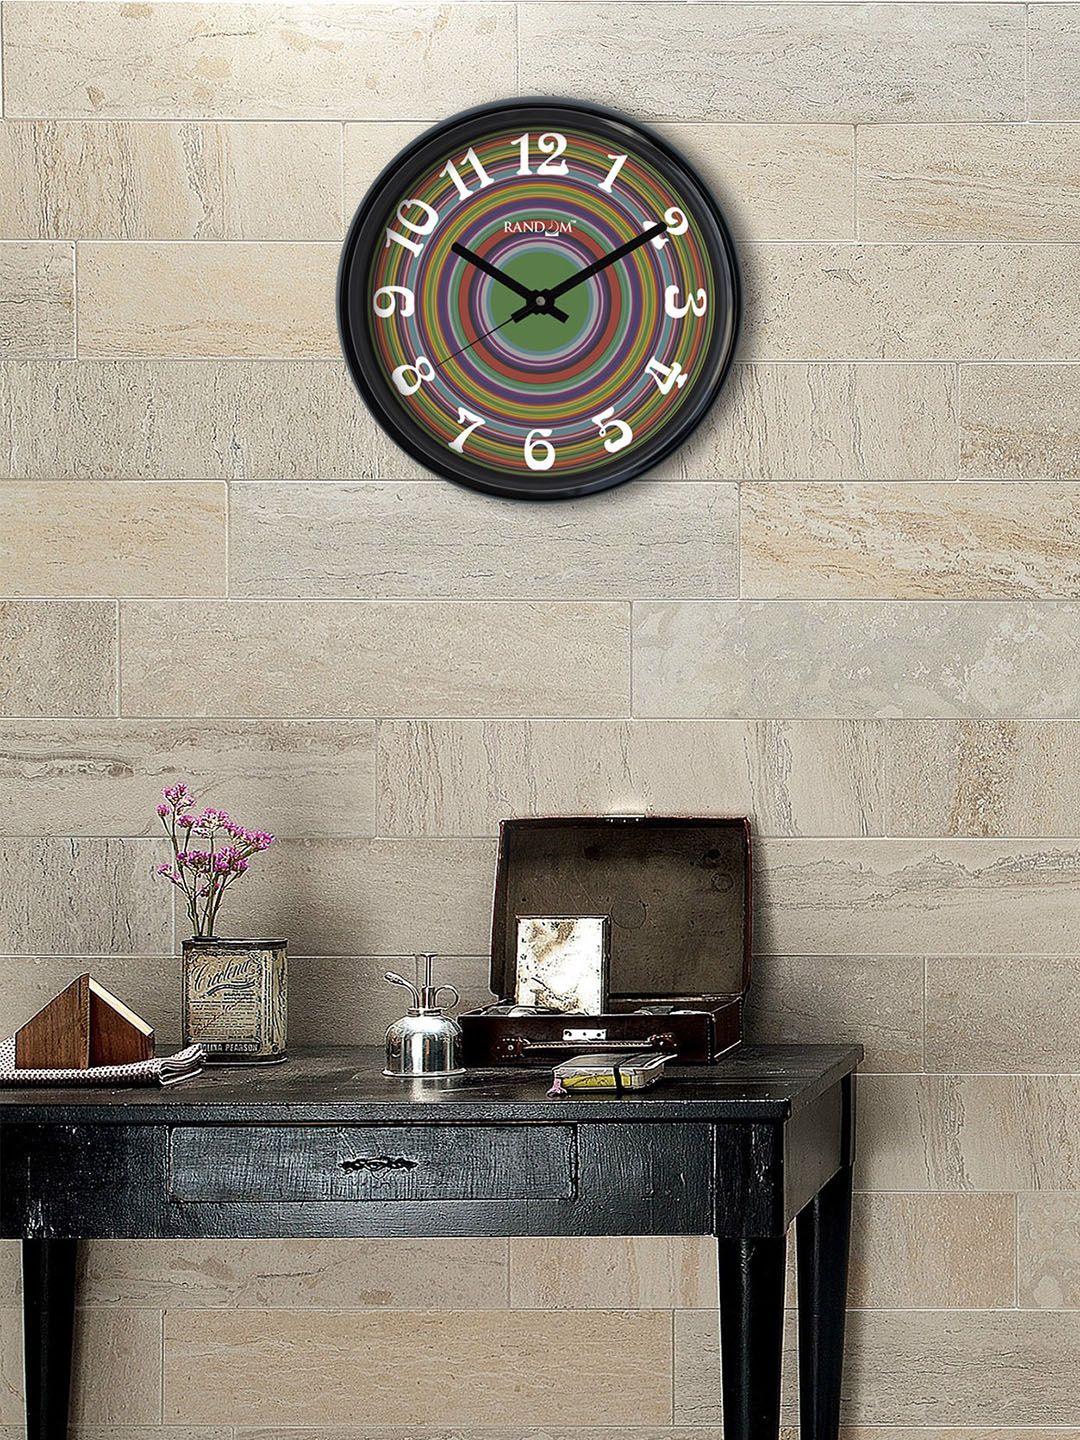 RANDOM Multicoloured Round Solid 30.48 cm Analogue Wall Clock Price in India